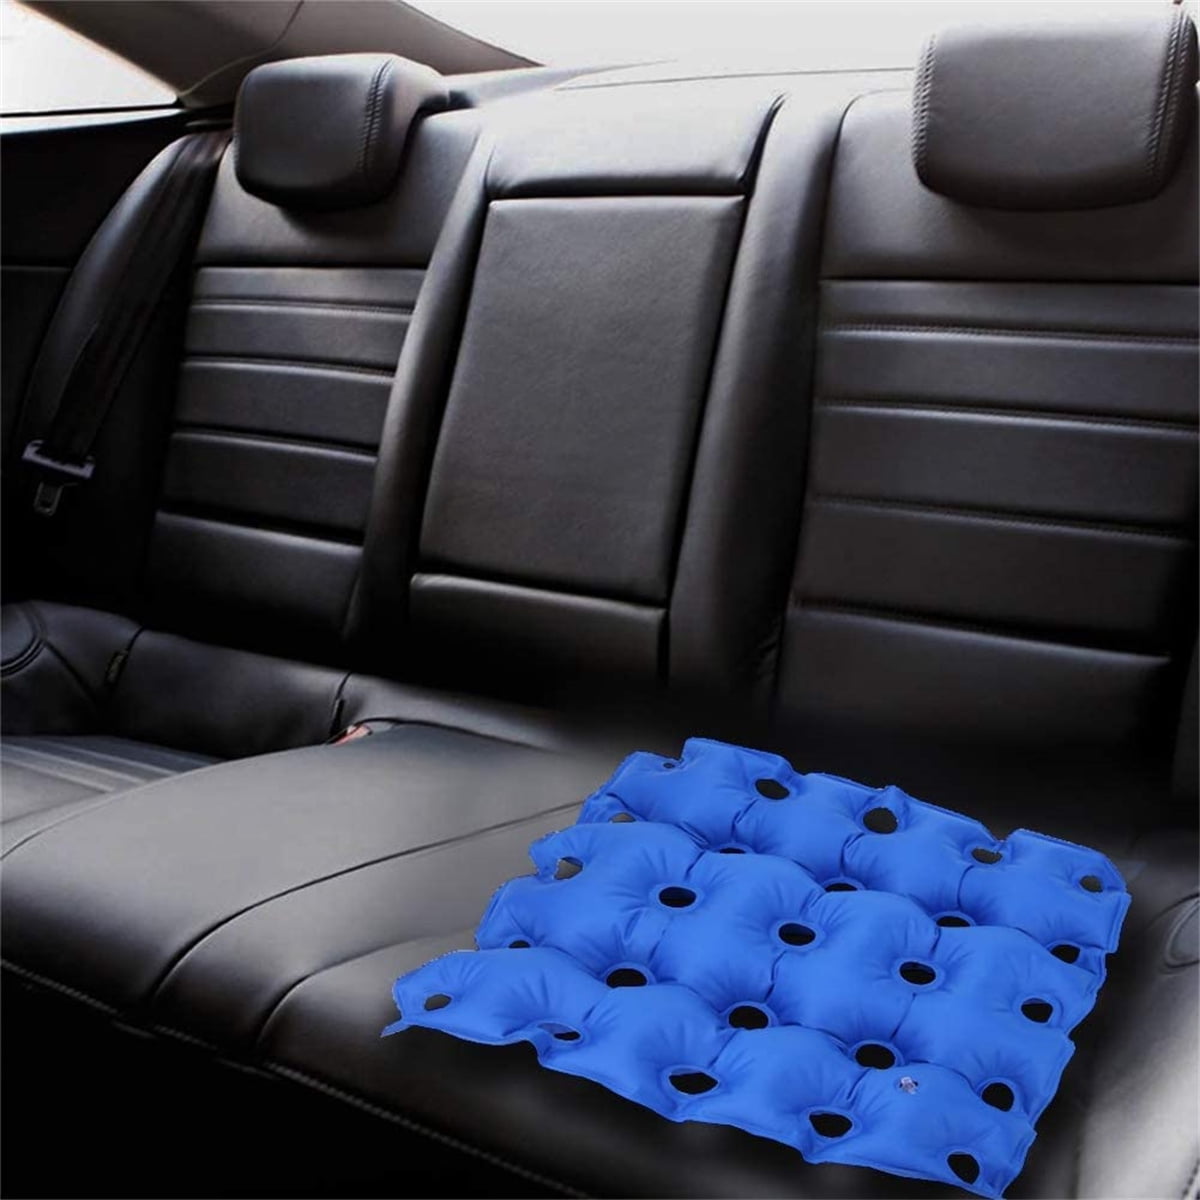 Inflatable Seat Cushion by Casewin- Travel Seat Cushion for Airplane, Car,  Office, Wheelchair - Adjustable Pressure Pillow for Sitting Pain Free Blue  